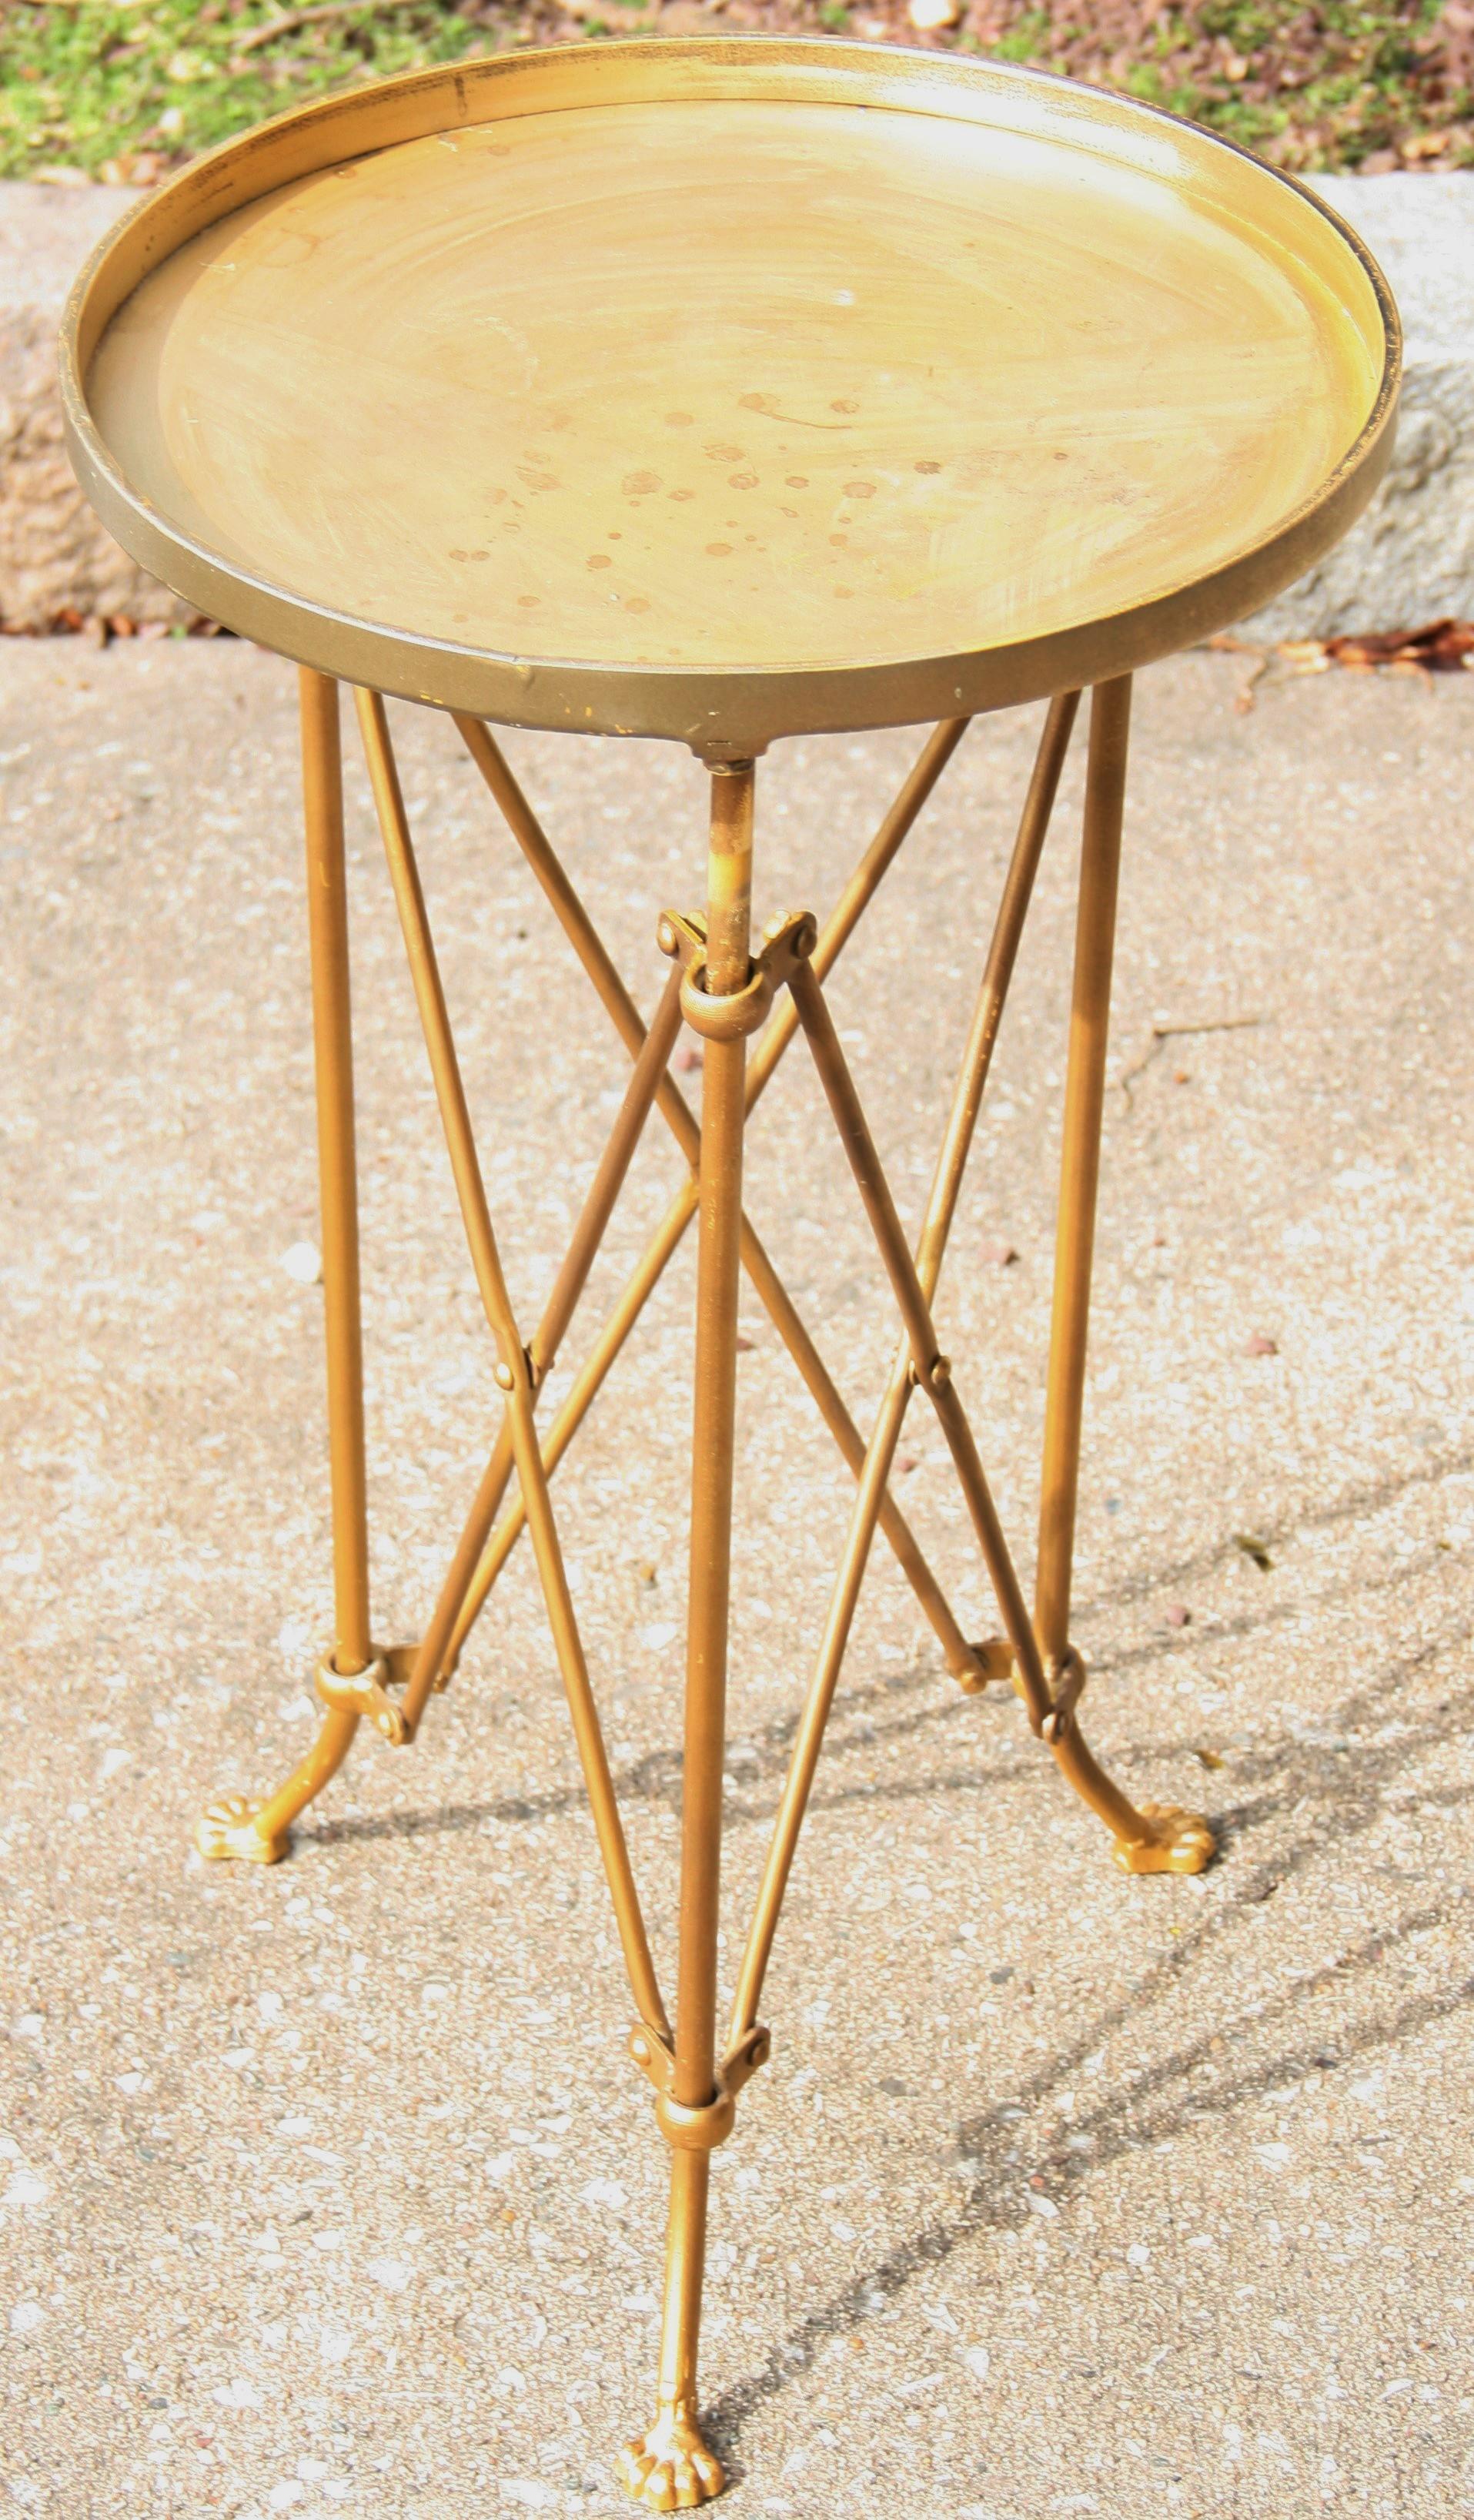 2-336 metal side table / plant stand or drink table